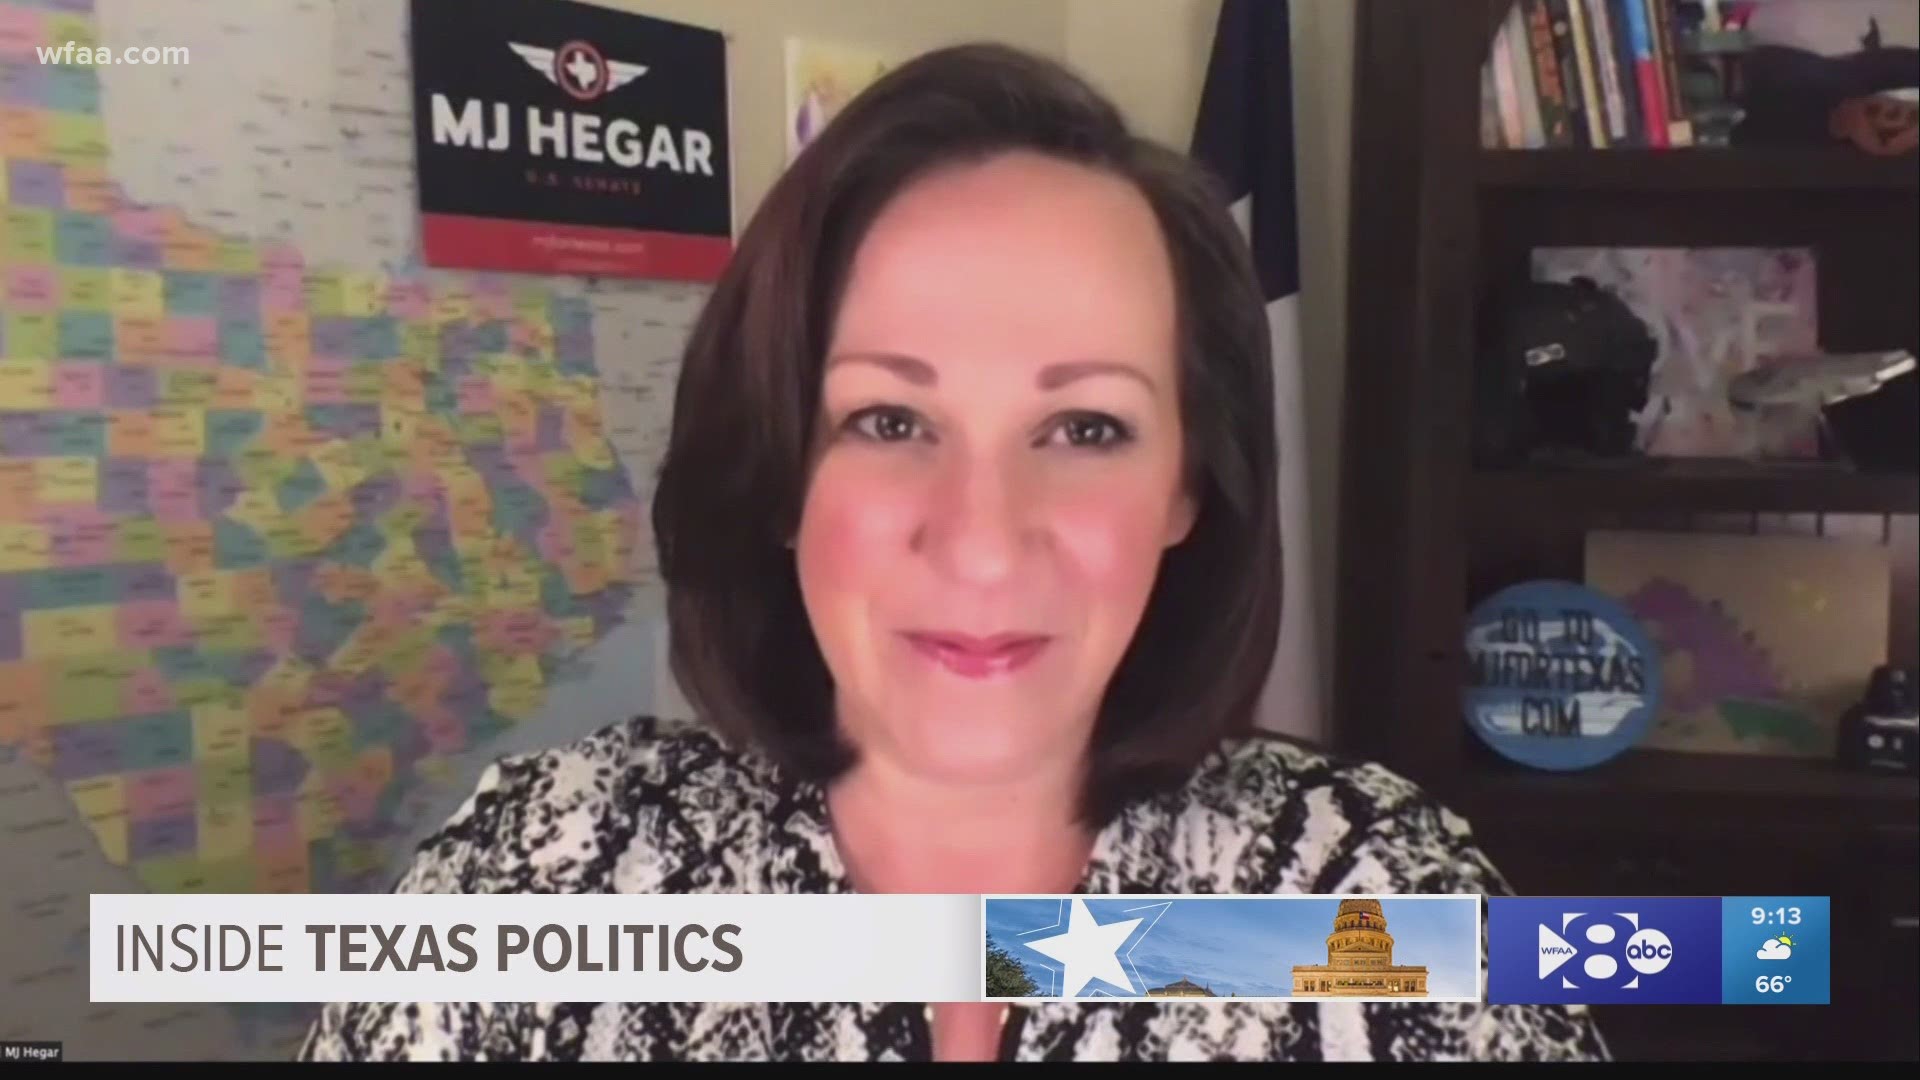 With the clock ticking towards Election Day, candidate MJ Hegar shares how her campaign plans to spend the millions it has raised.